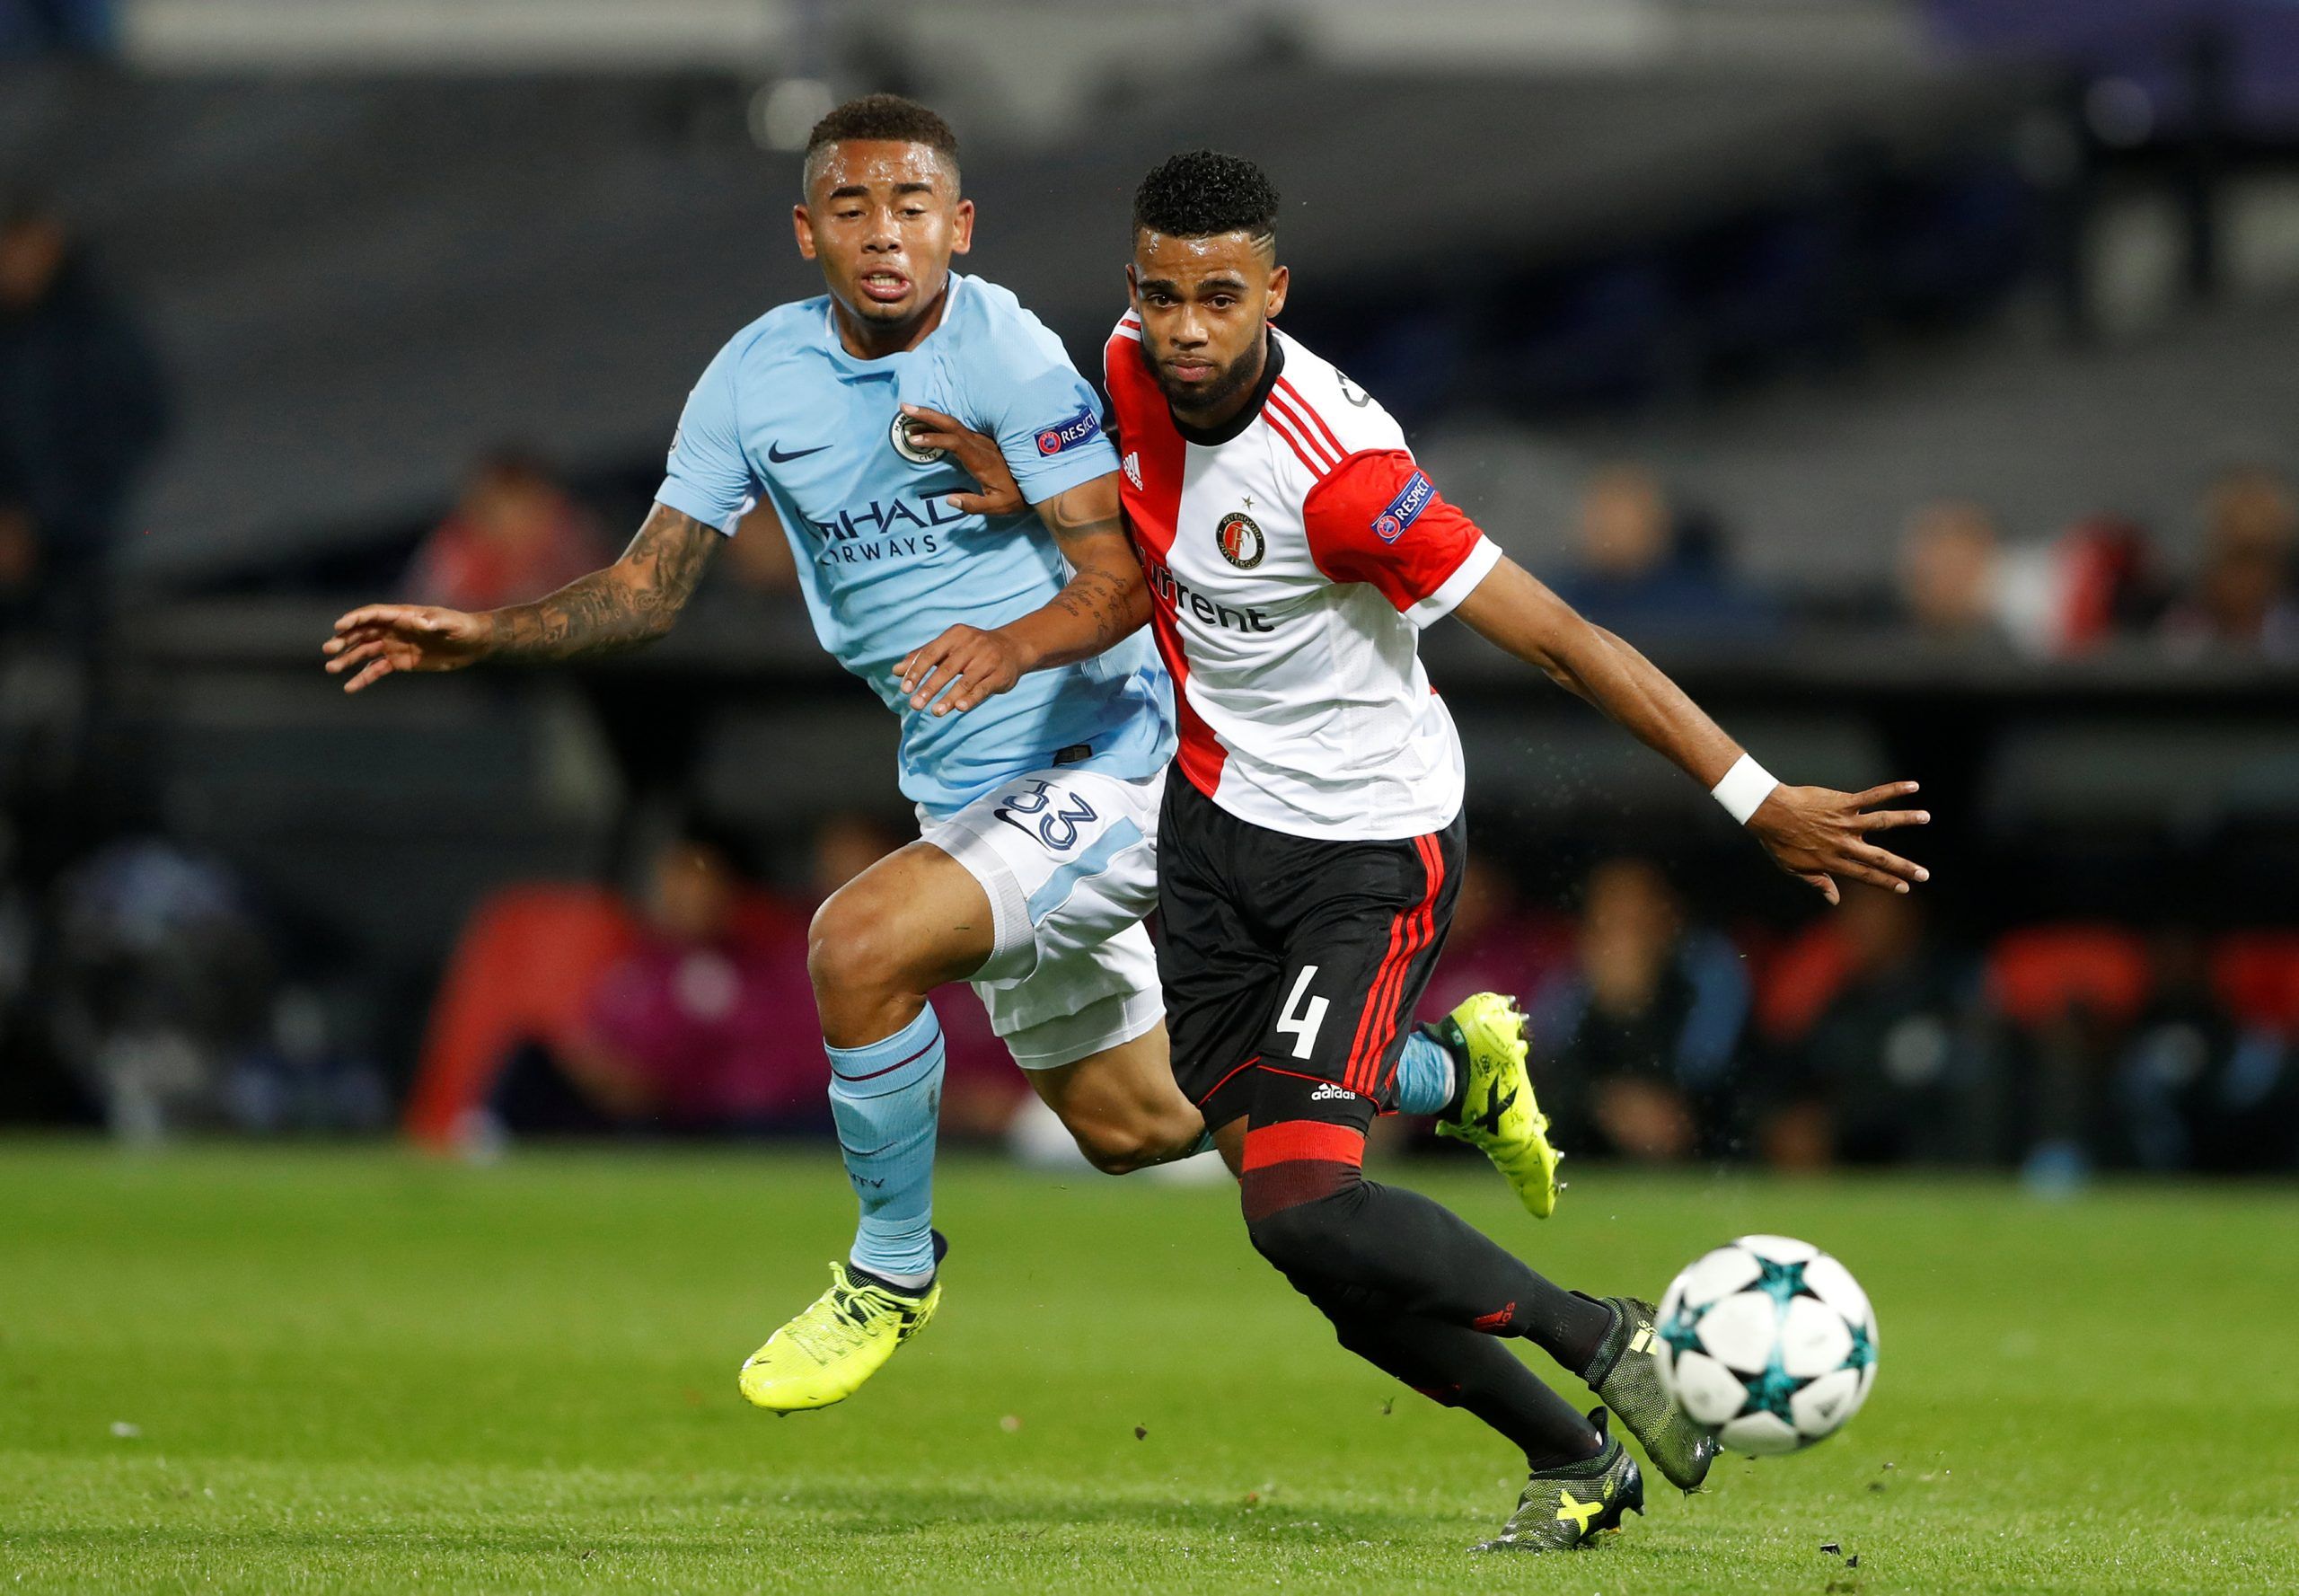 Soccer Football - Champions League - Feyenoord vs Manchester City - De Kuip, Rotterdam, Netherlands - September 13, 2017   Manchester City's Gabriel Jesus in action with Feyenoord's Jeremiah St. Juste    Action Images via Reuters/Carl Recine